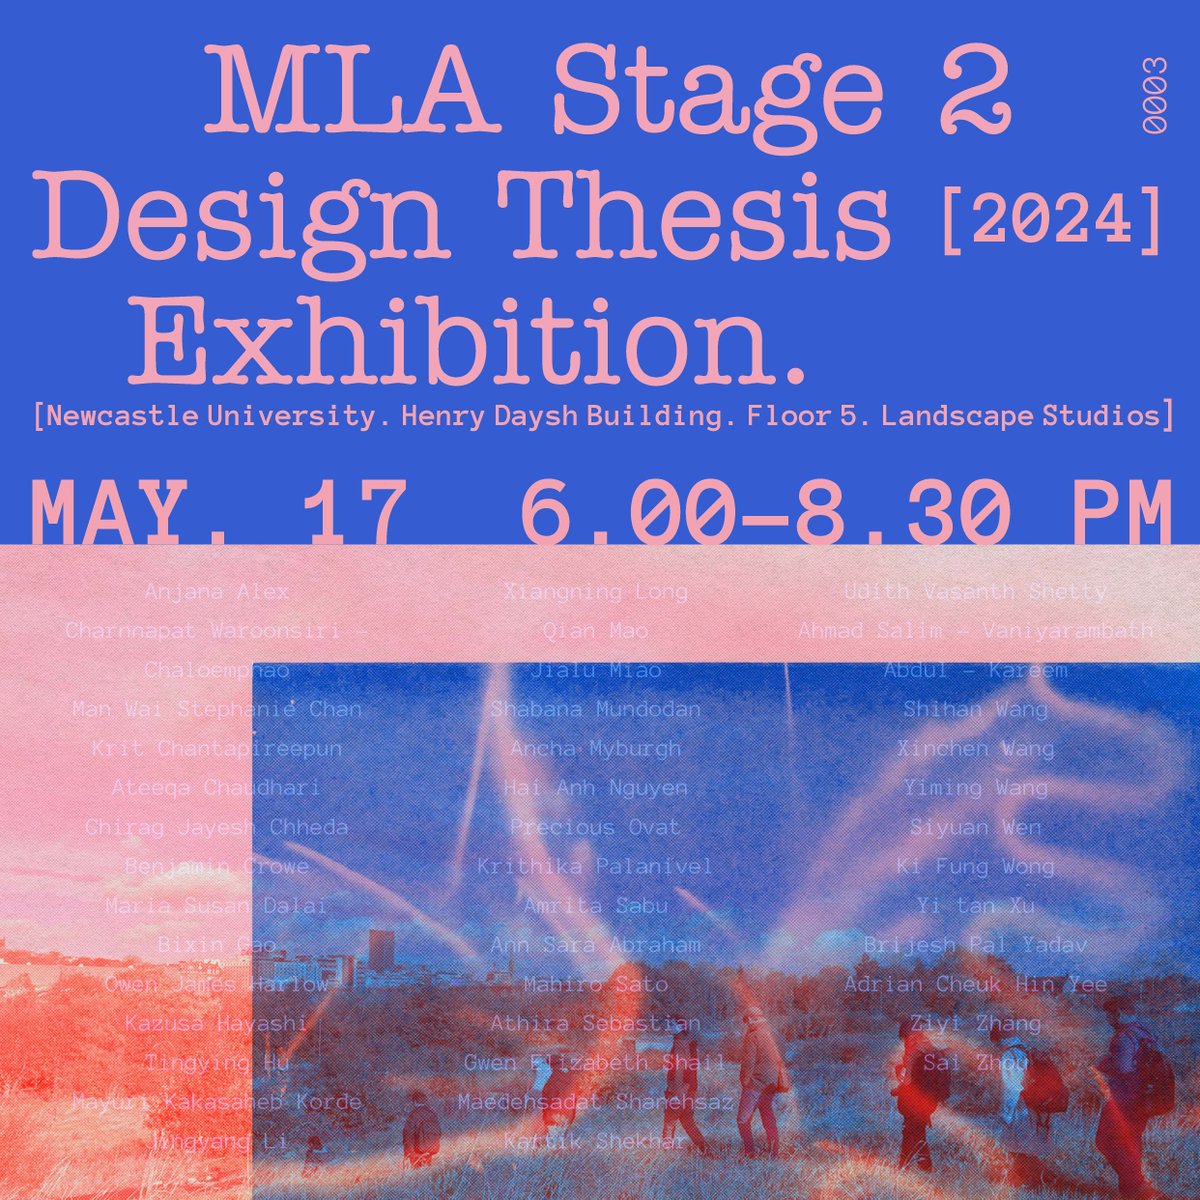 Join us on Friday 17 May at 6pm for the Design Thesis Exhibition of our Master of Landscape Stage 2 graduating students. 📍 Landscape Studios, 5th Floor, Henry Daysh Building, Newcastle University